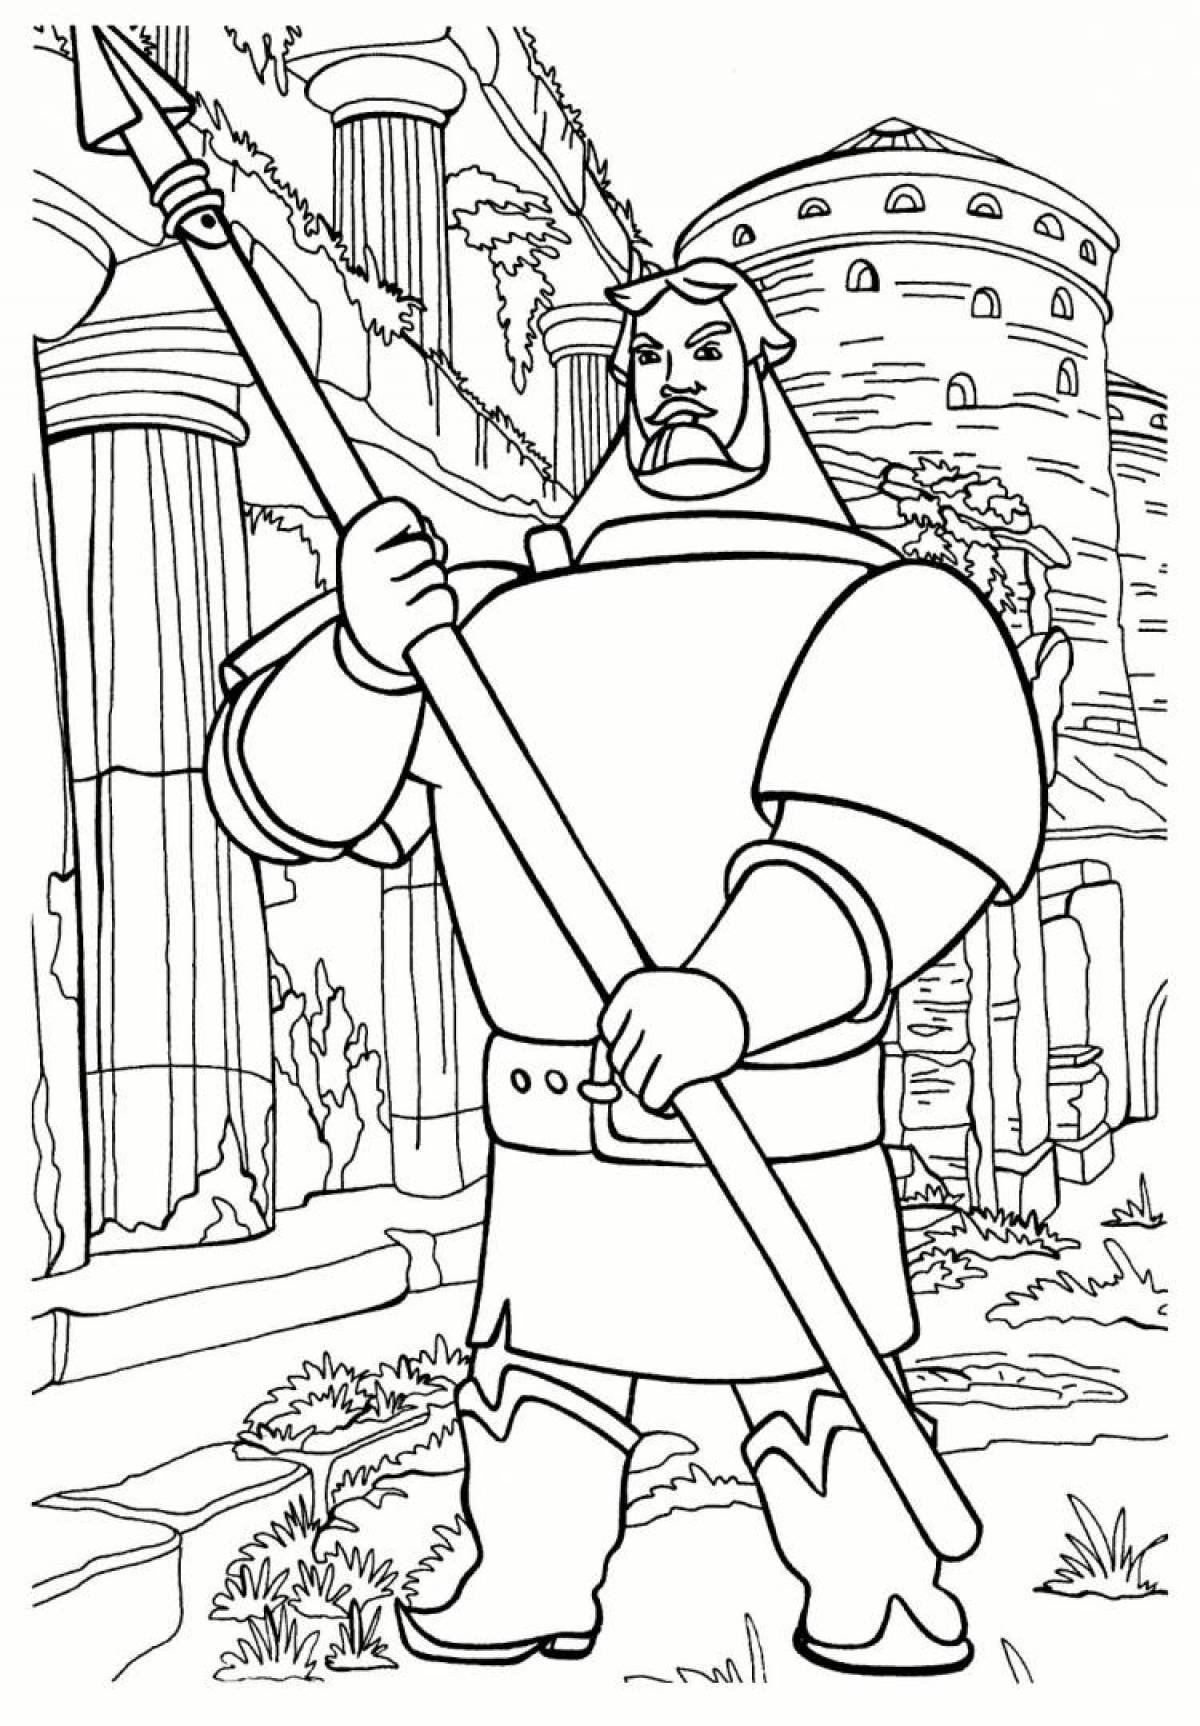 Fairy coloring page 3 heroes